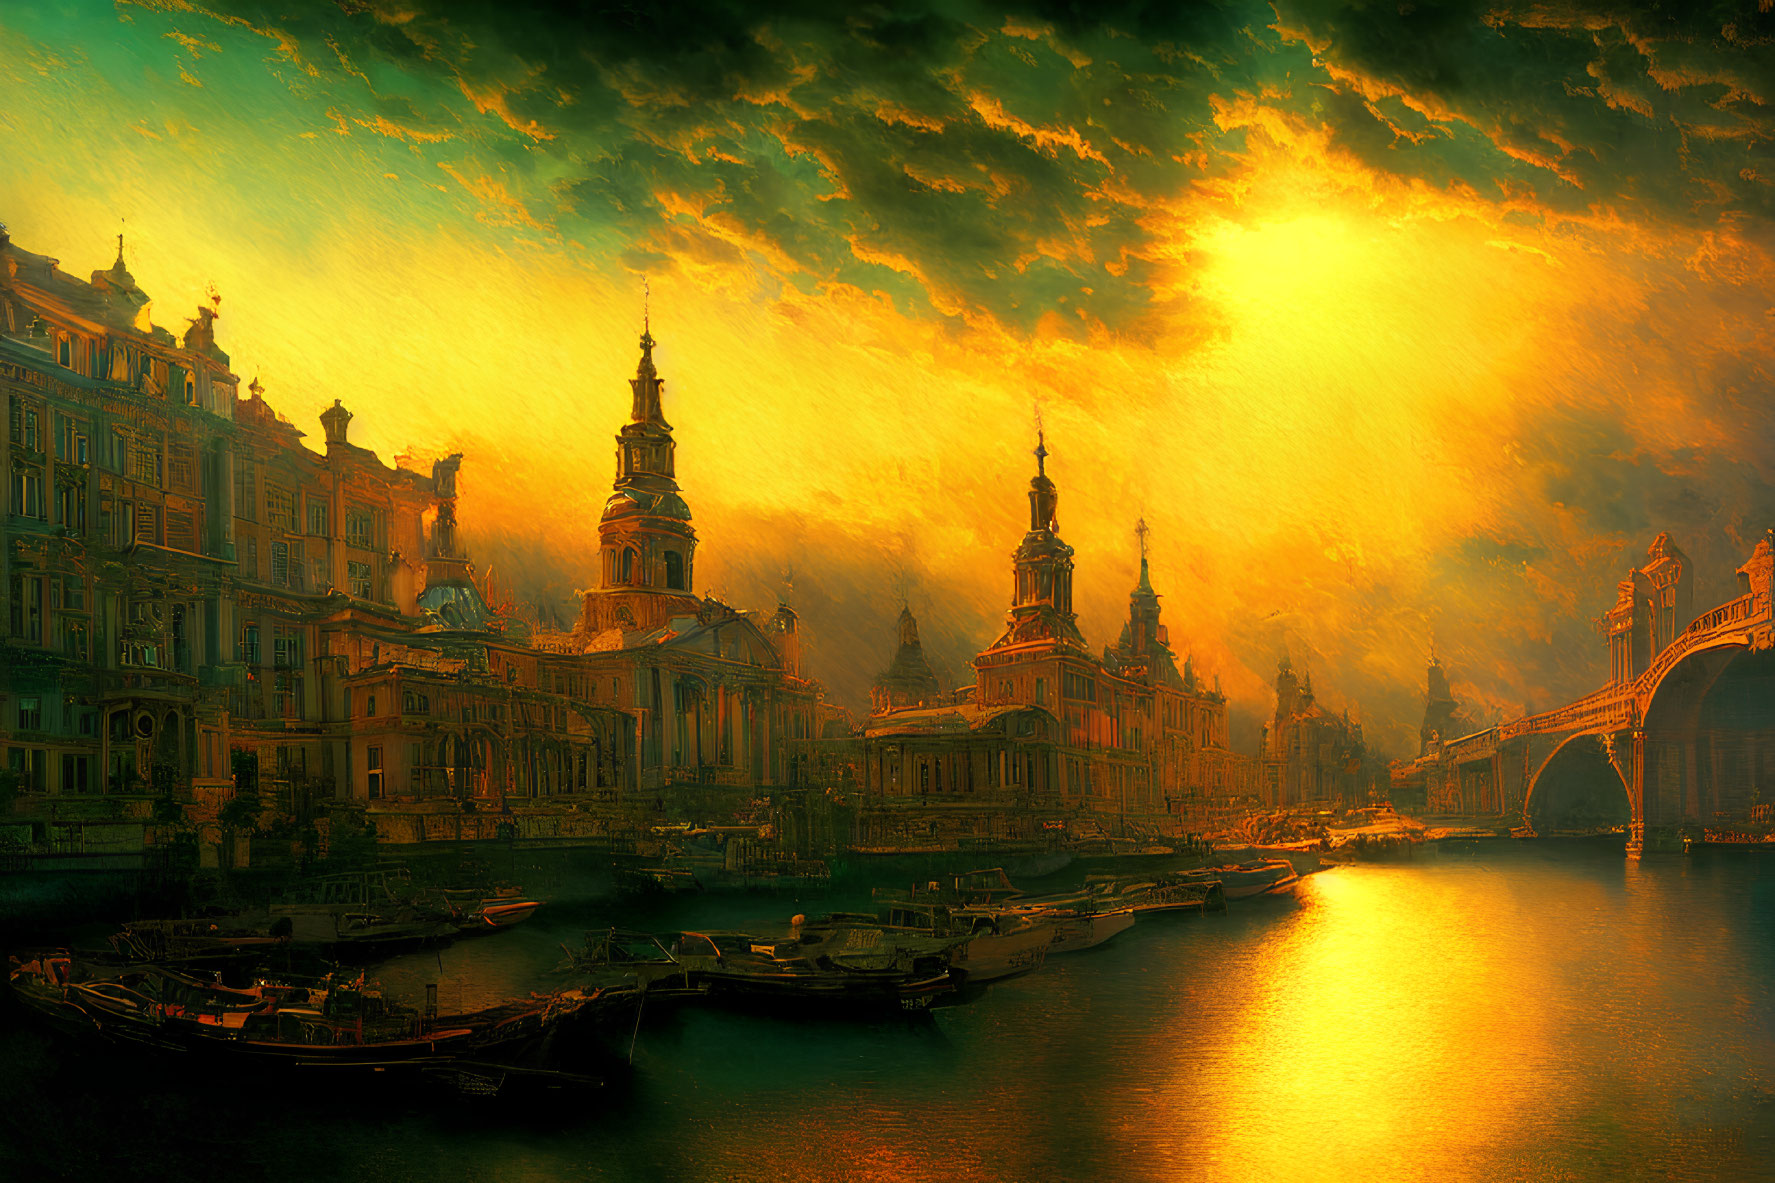 Vibrant sunset over historic riverfront cityscape with baroque architecture, boats, and bridge